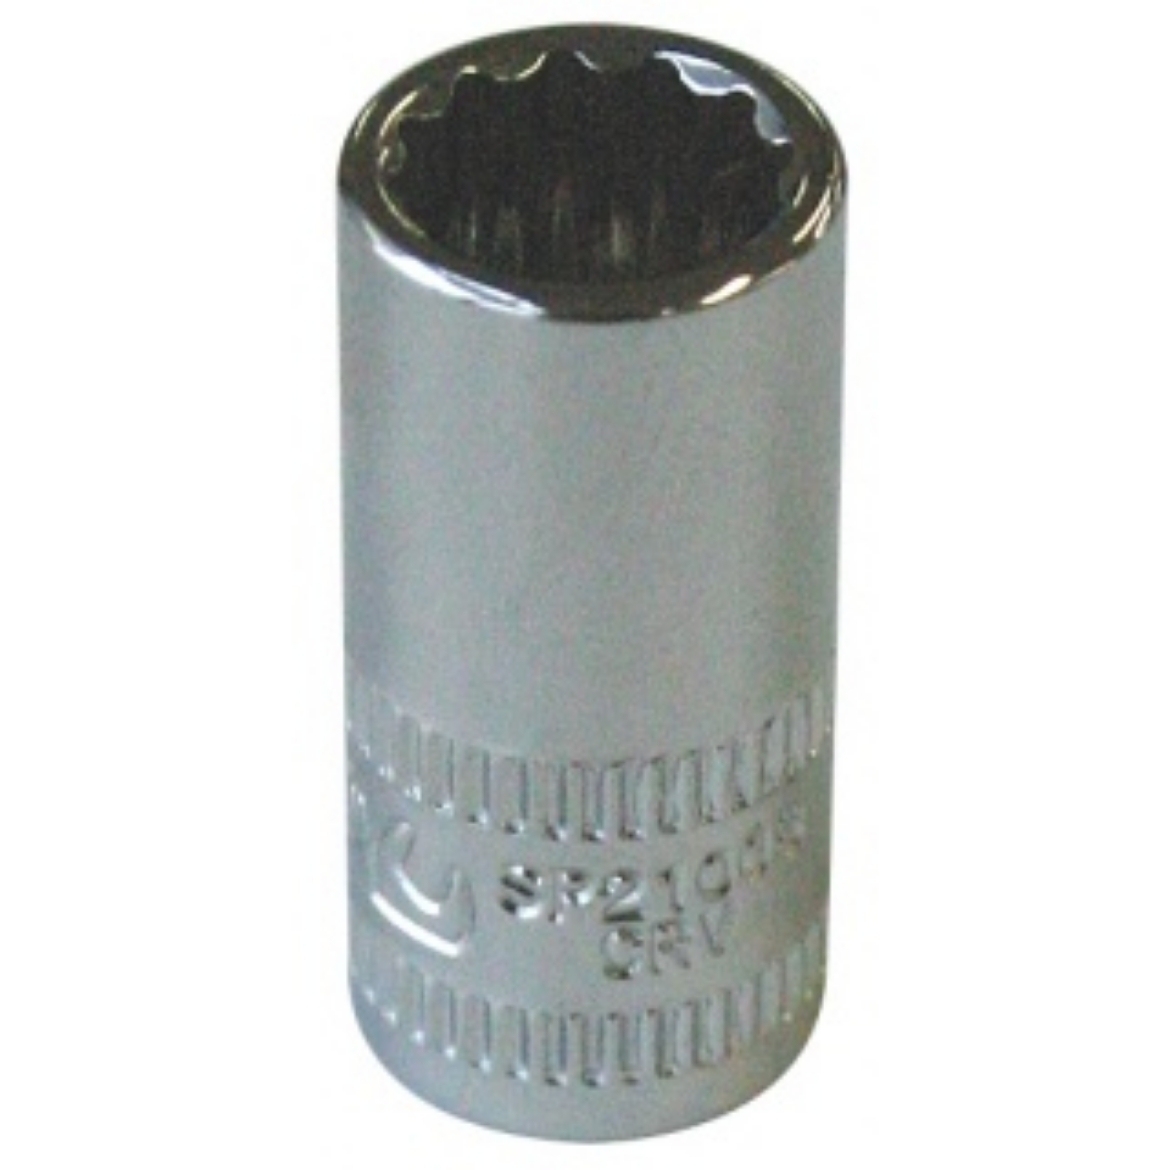 Picture of SOCKET 1/4"DR 12 PT SAE 5/16" SP TOOLS